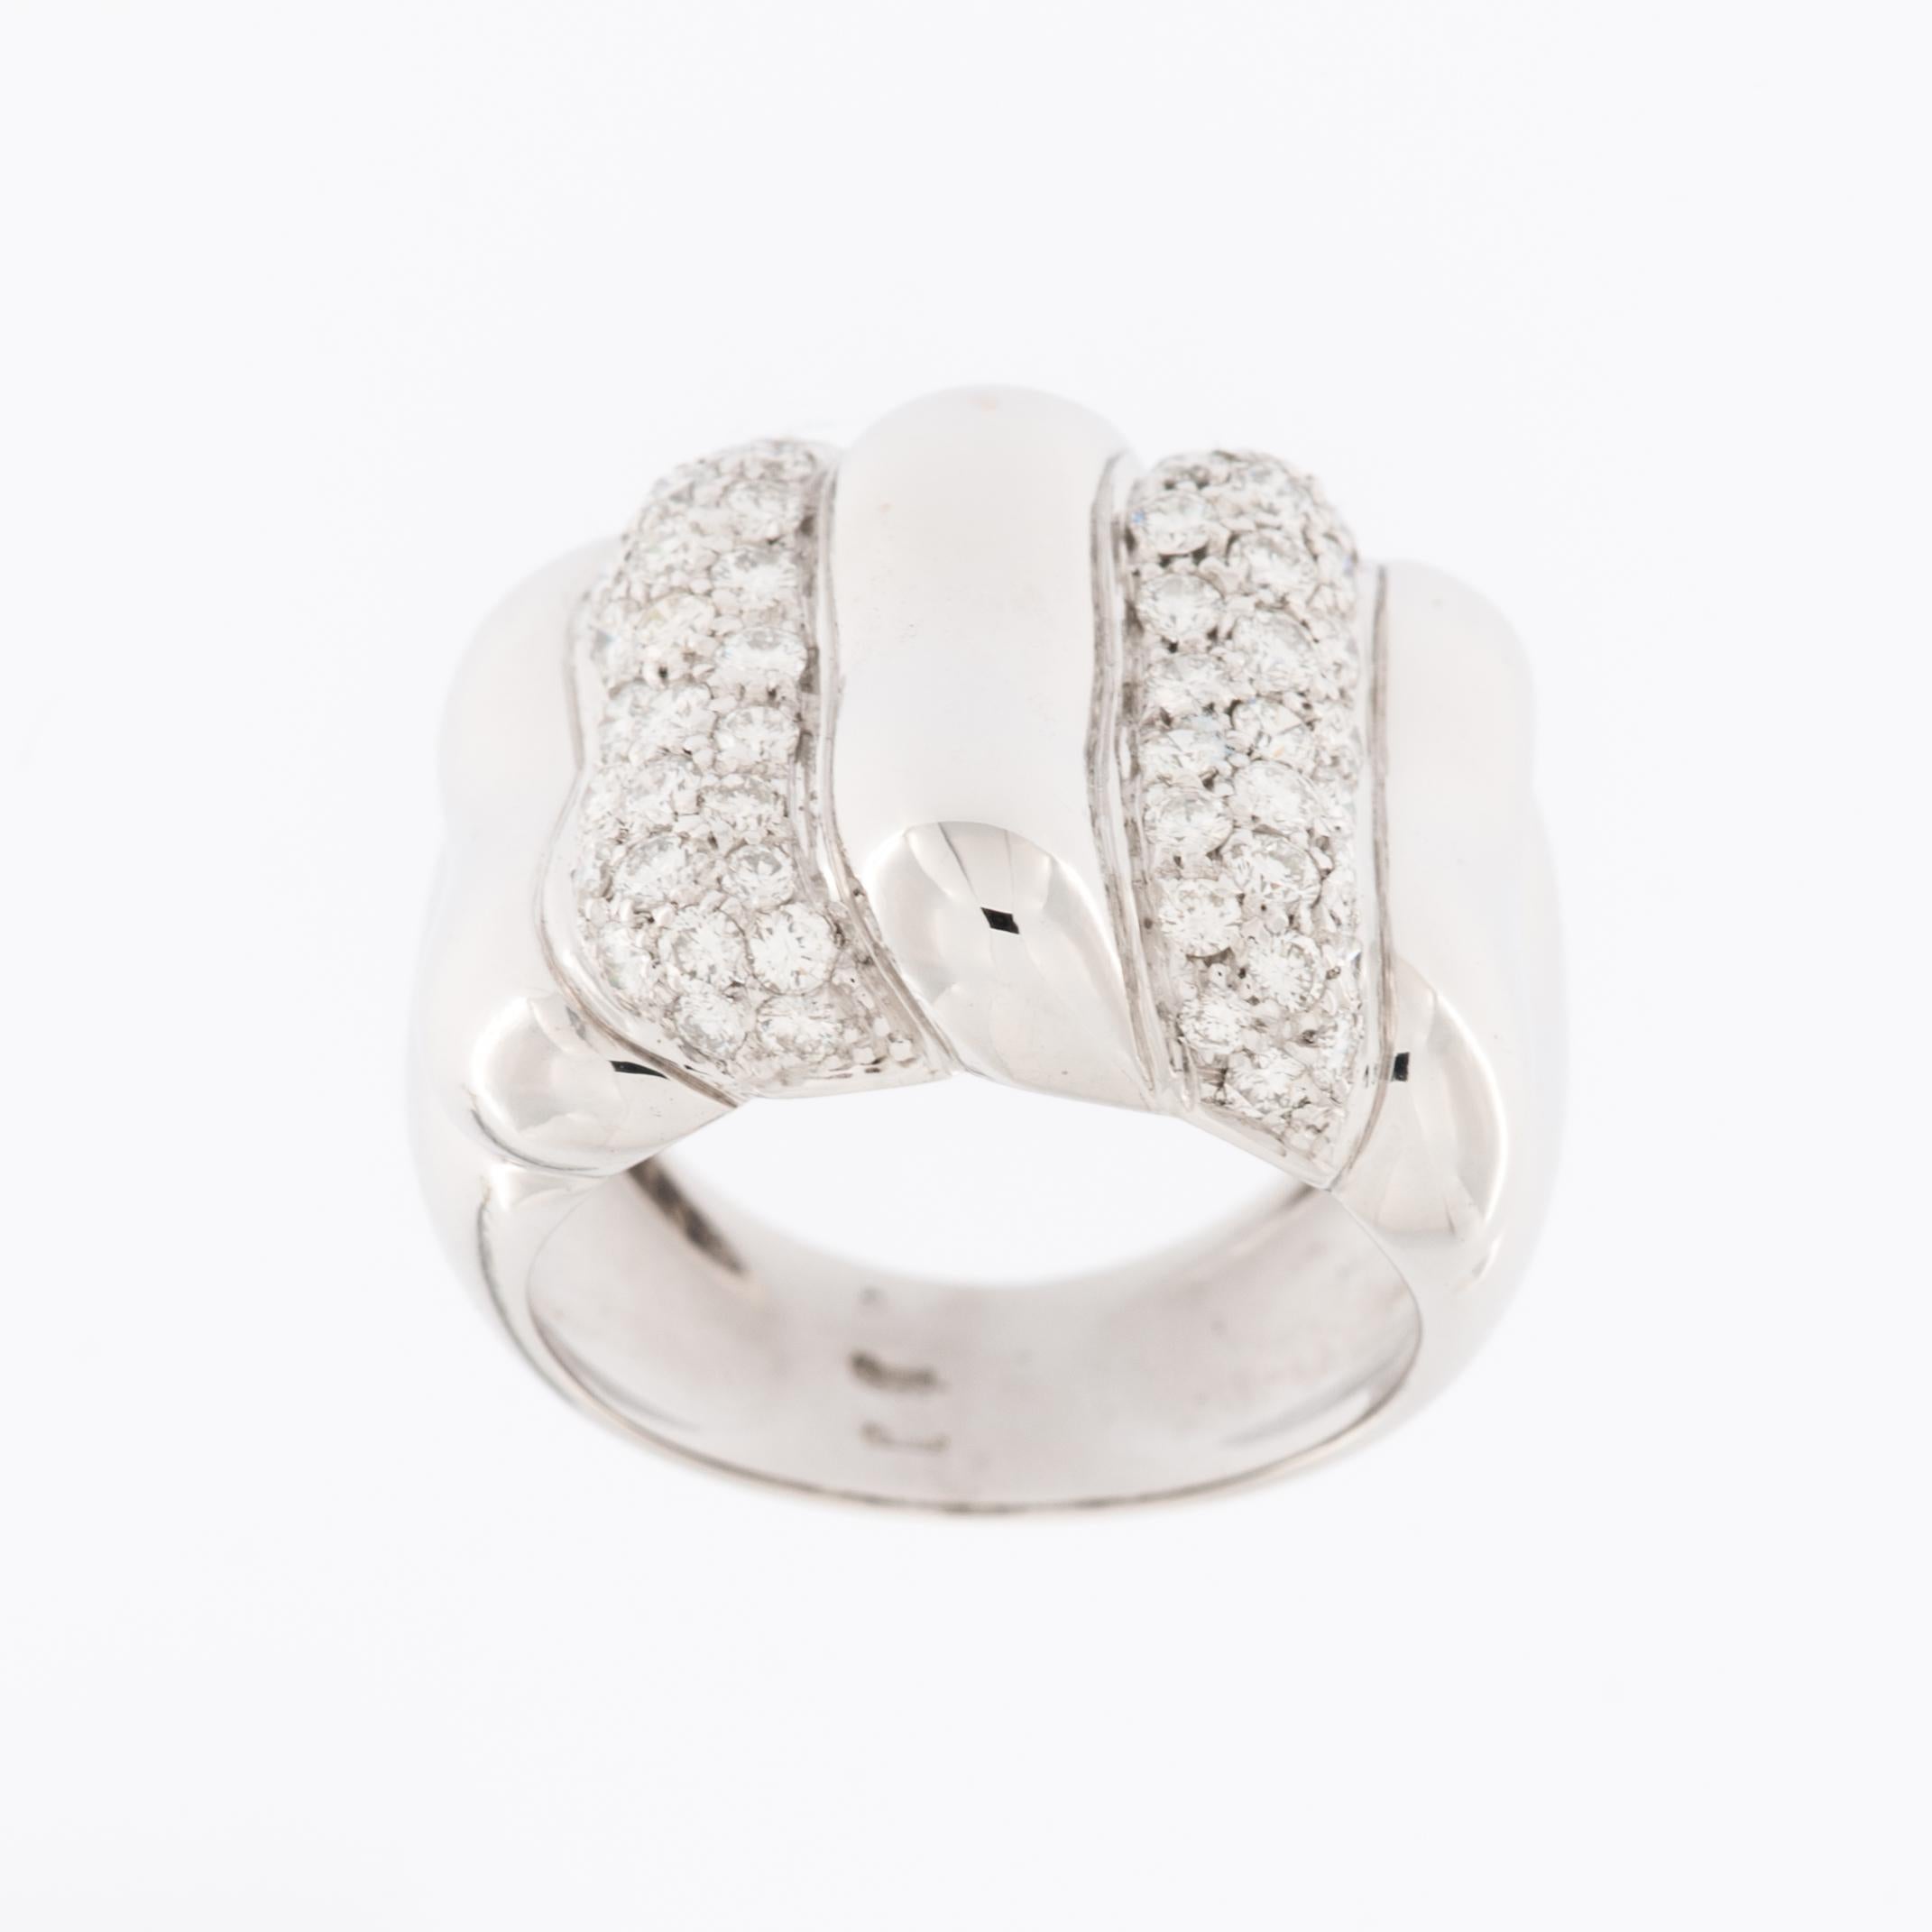 The Modern Italian Ring in 18kt White Gold with Diamonds relief work is a stunning piece of jewelry that combines contemporary design with luxurious materials. 

This ring is crafted from 18-karat white gold, a precious metal known for its lustrous,